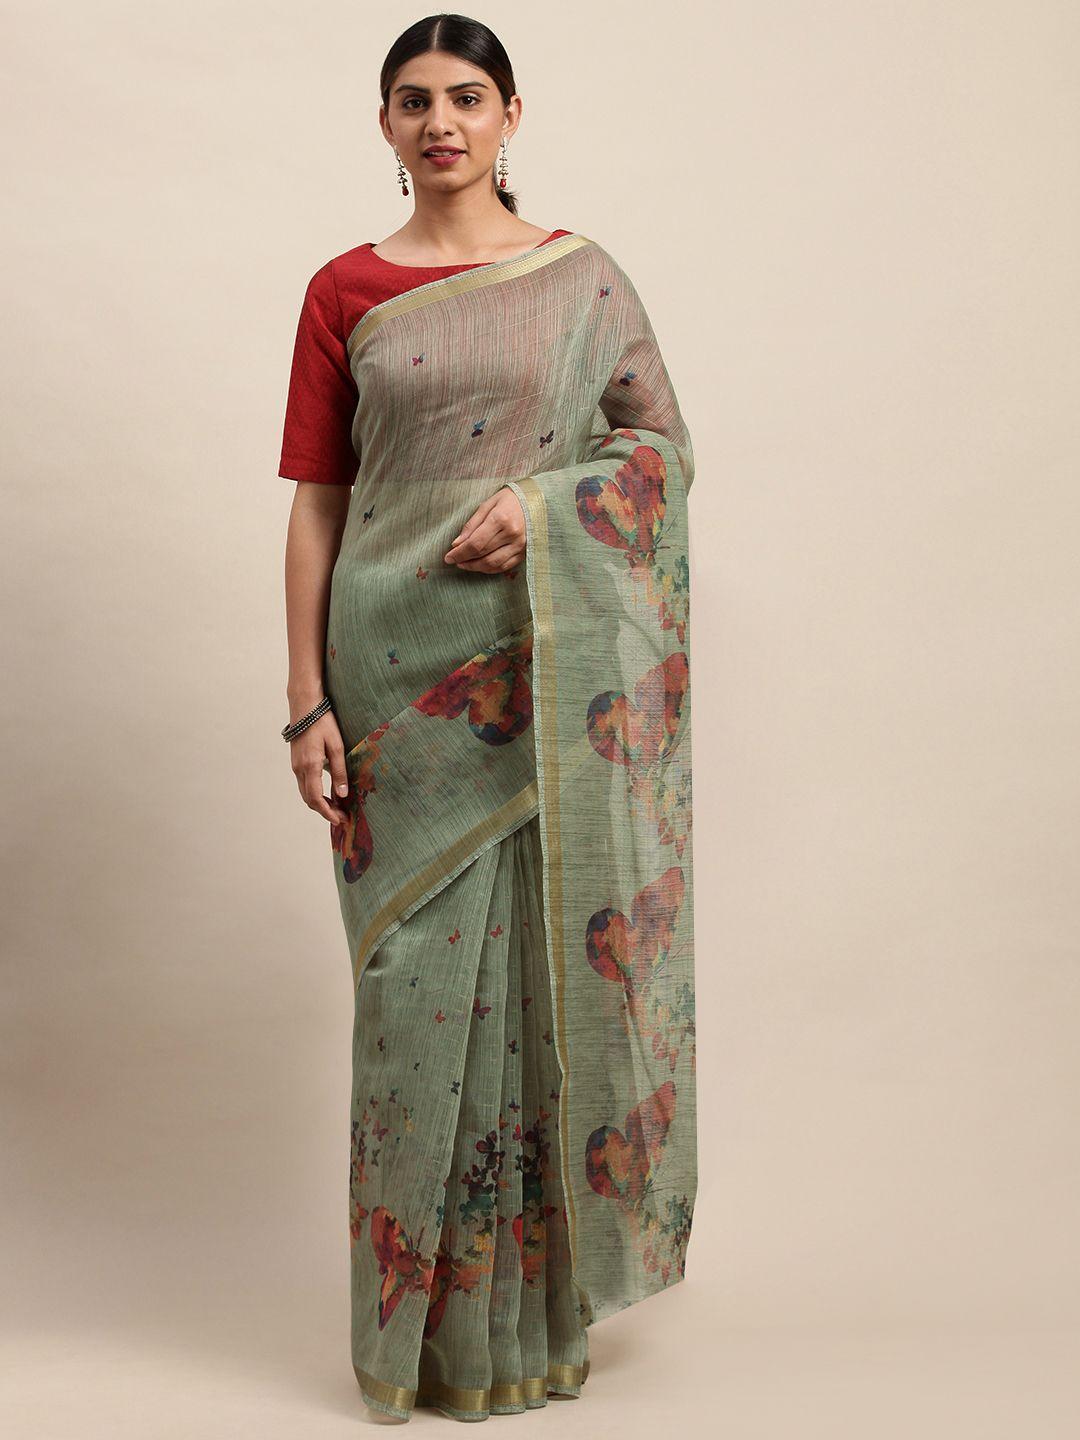 shaily olive green & red floral printed saree